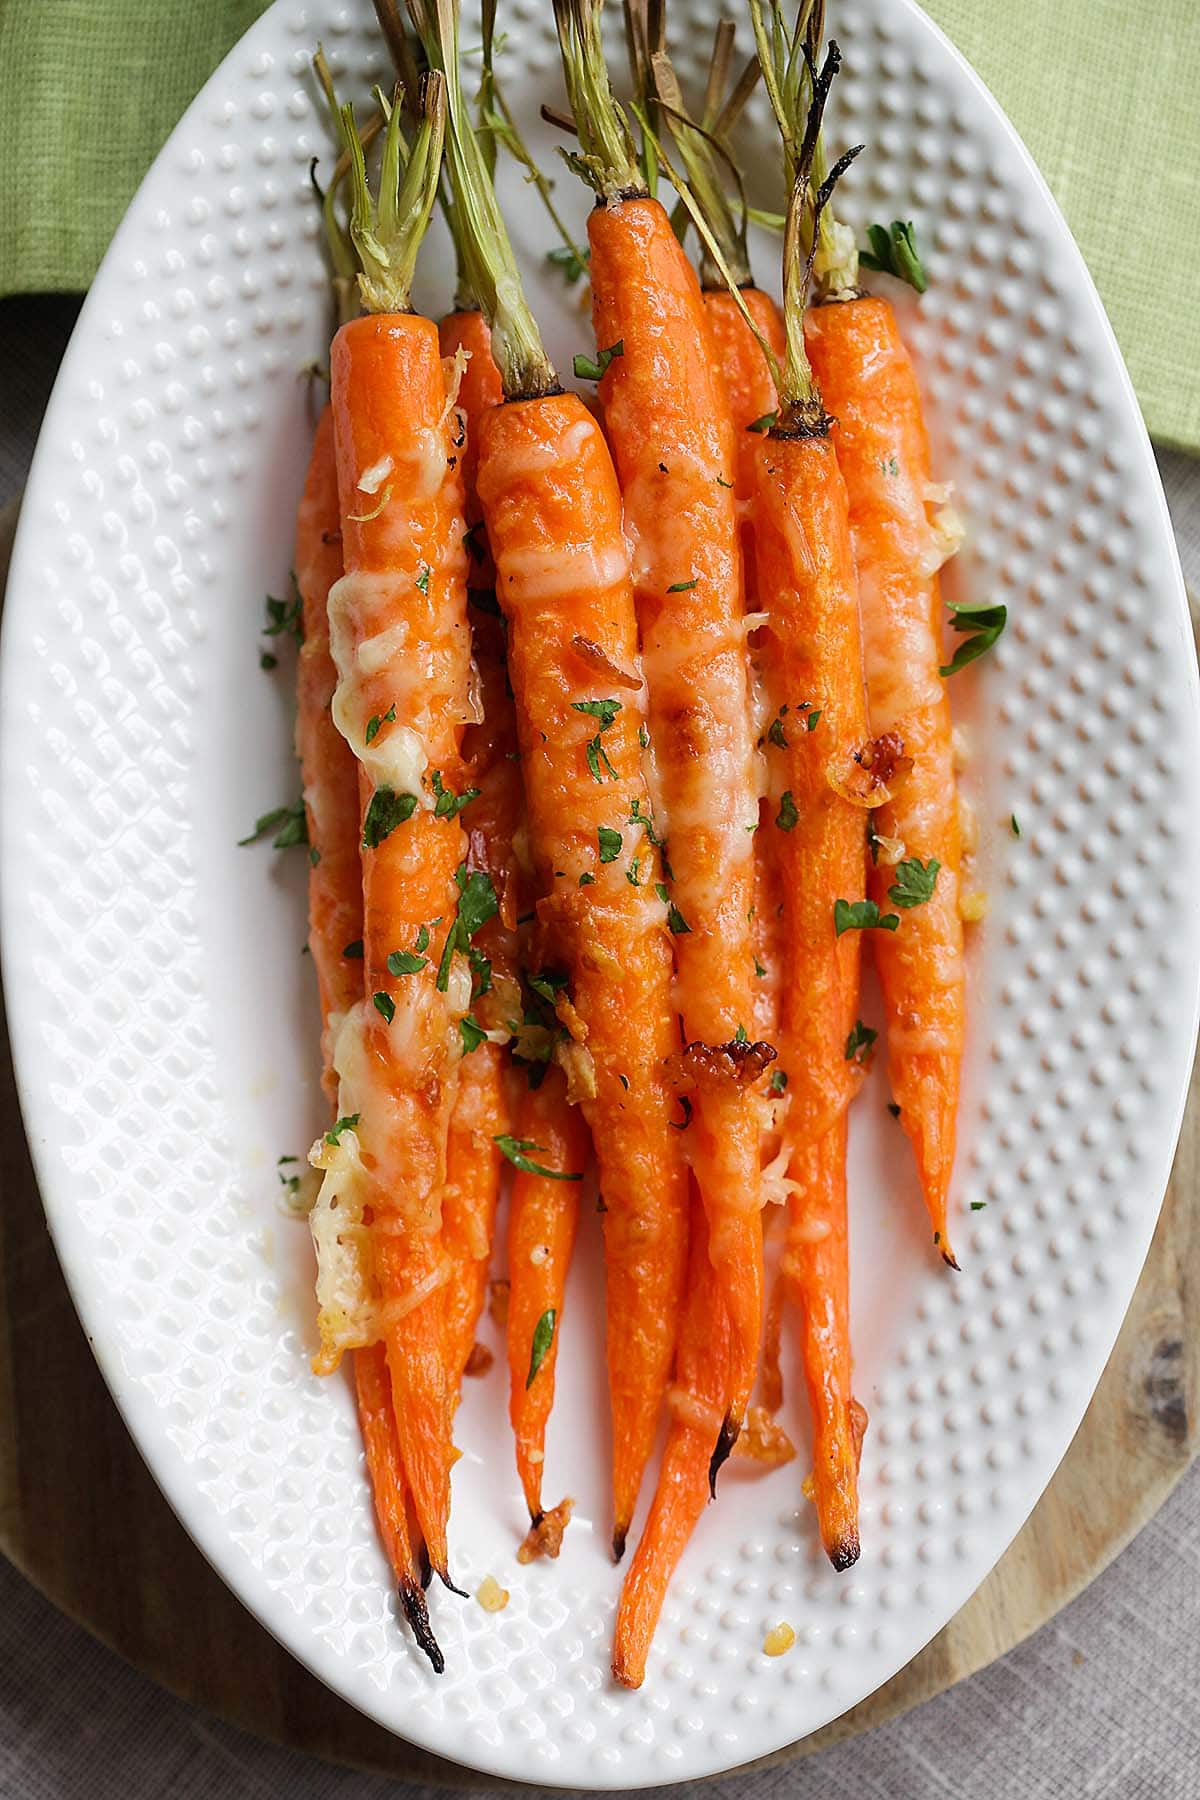 Roasted carrots recipe is healthy and great for kids.